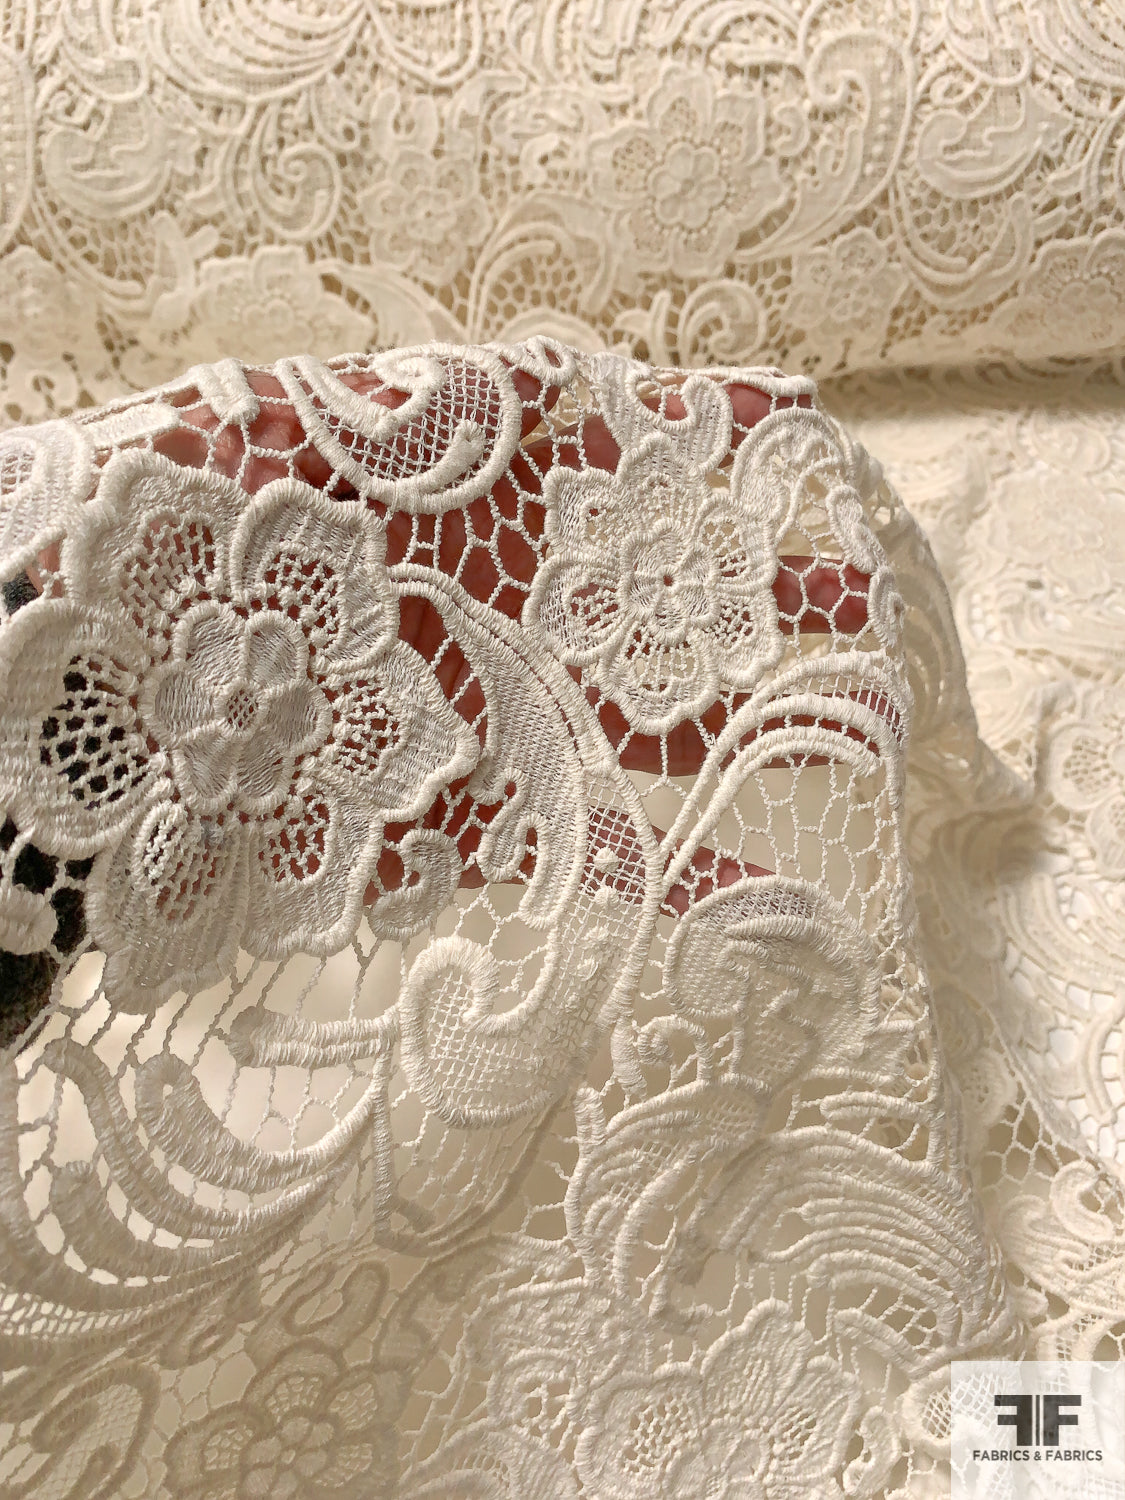 Cream Cotton Lace Fabric With Daisy Flowers, Guipure Lace Fabric